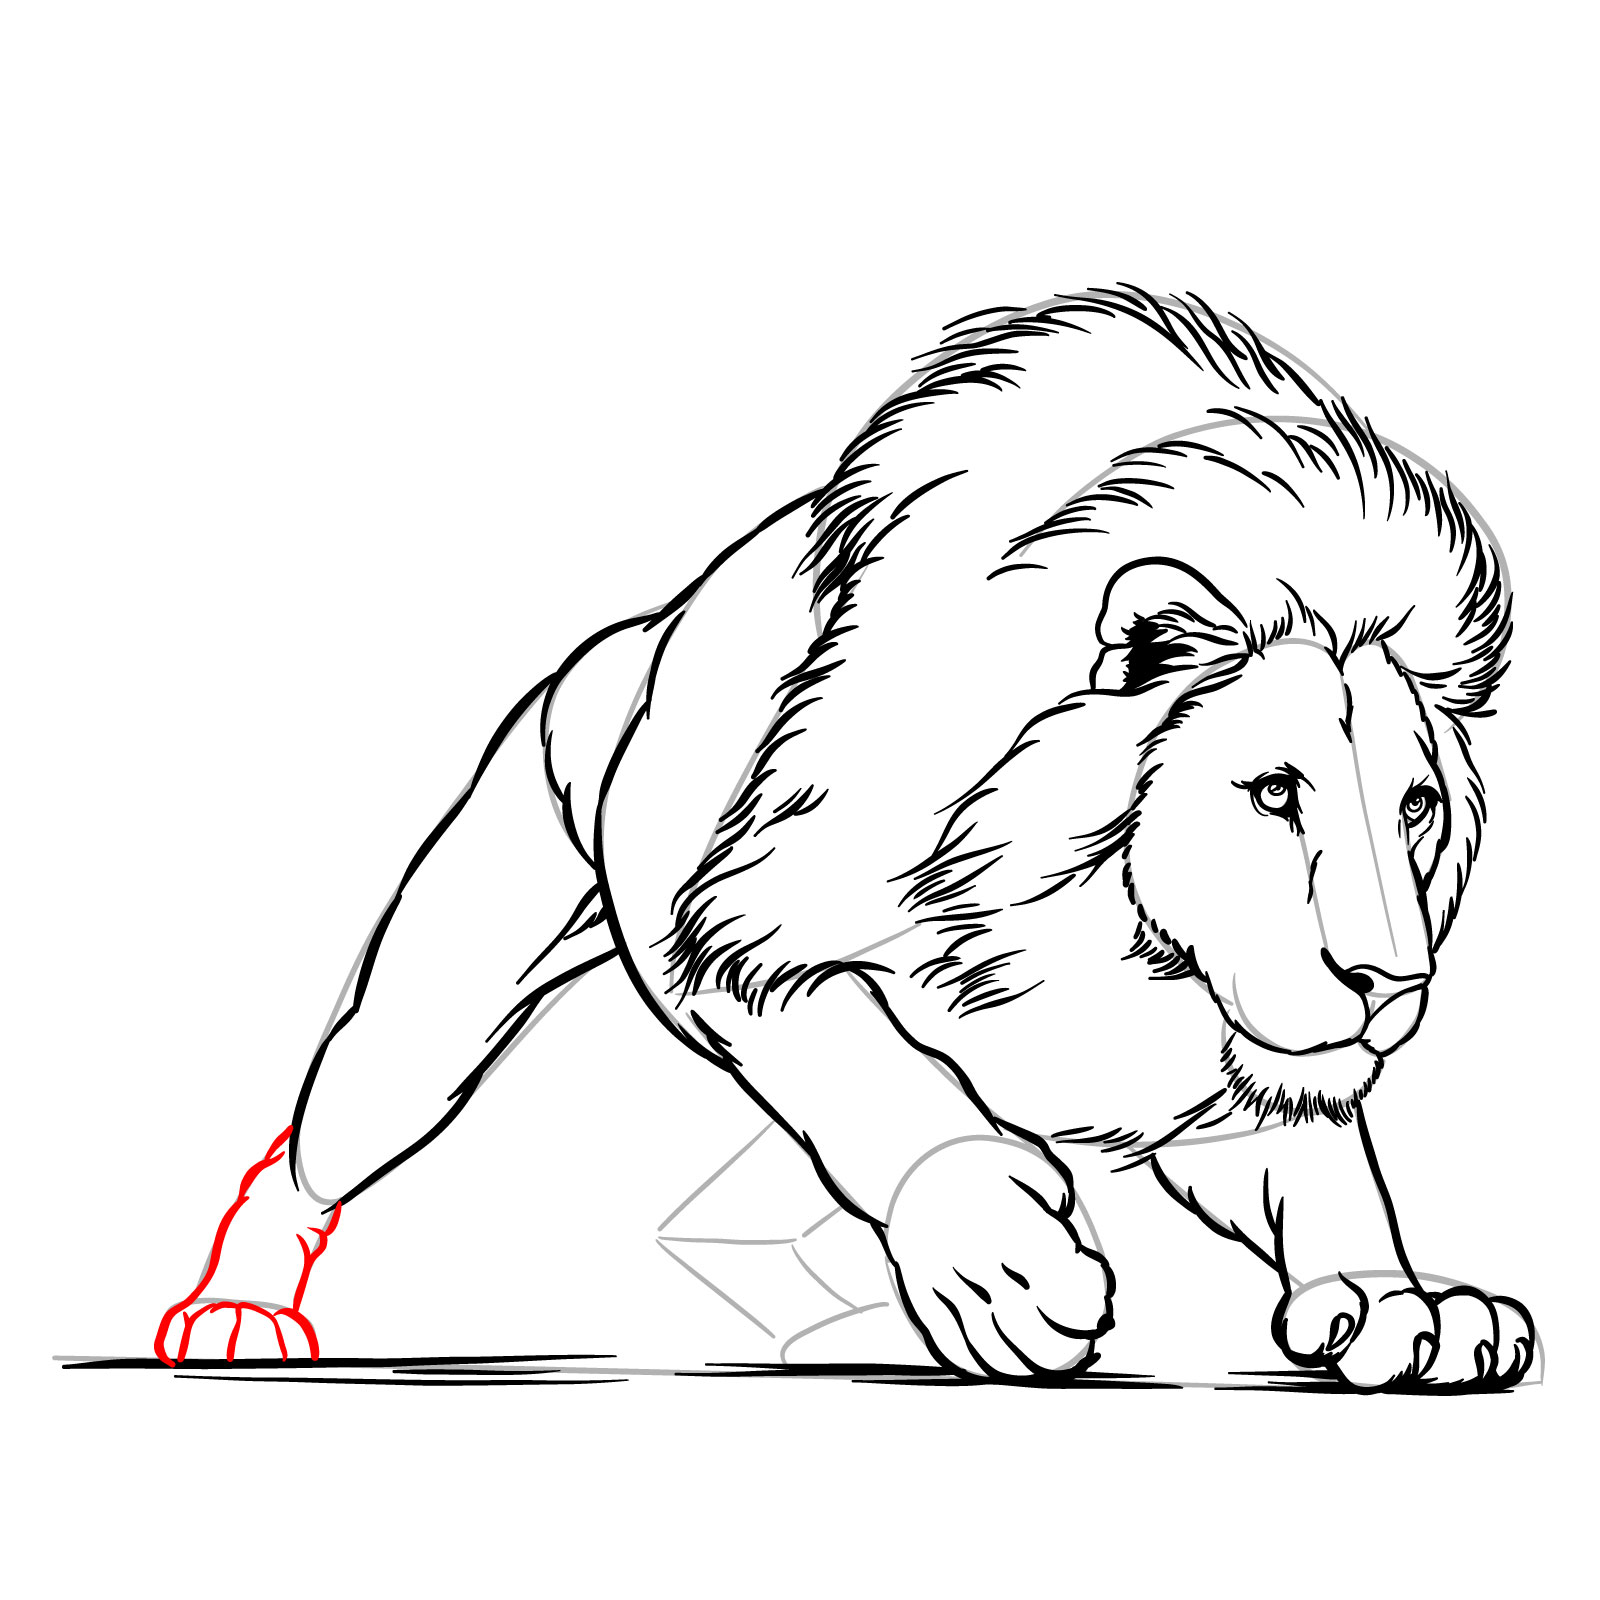 Hunting lion drawing - Step 16: Completing the first rear leg